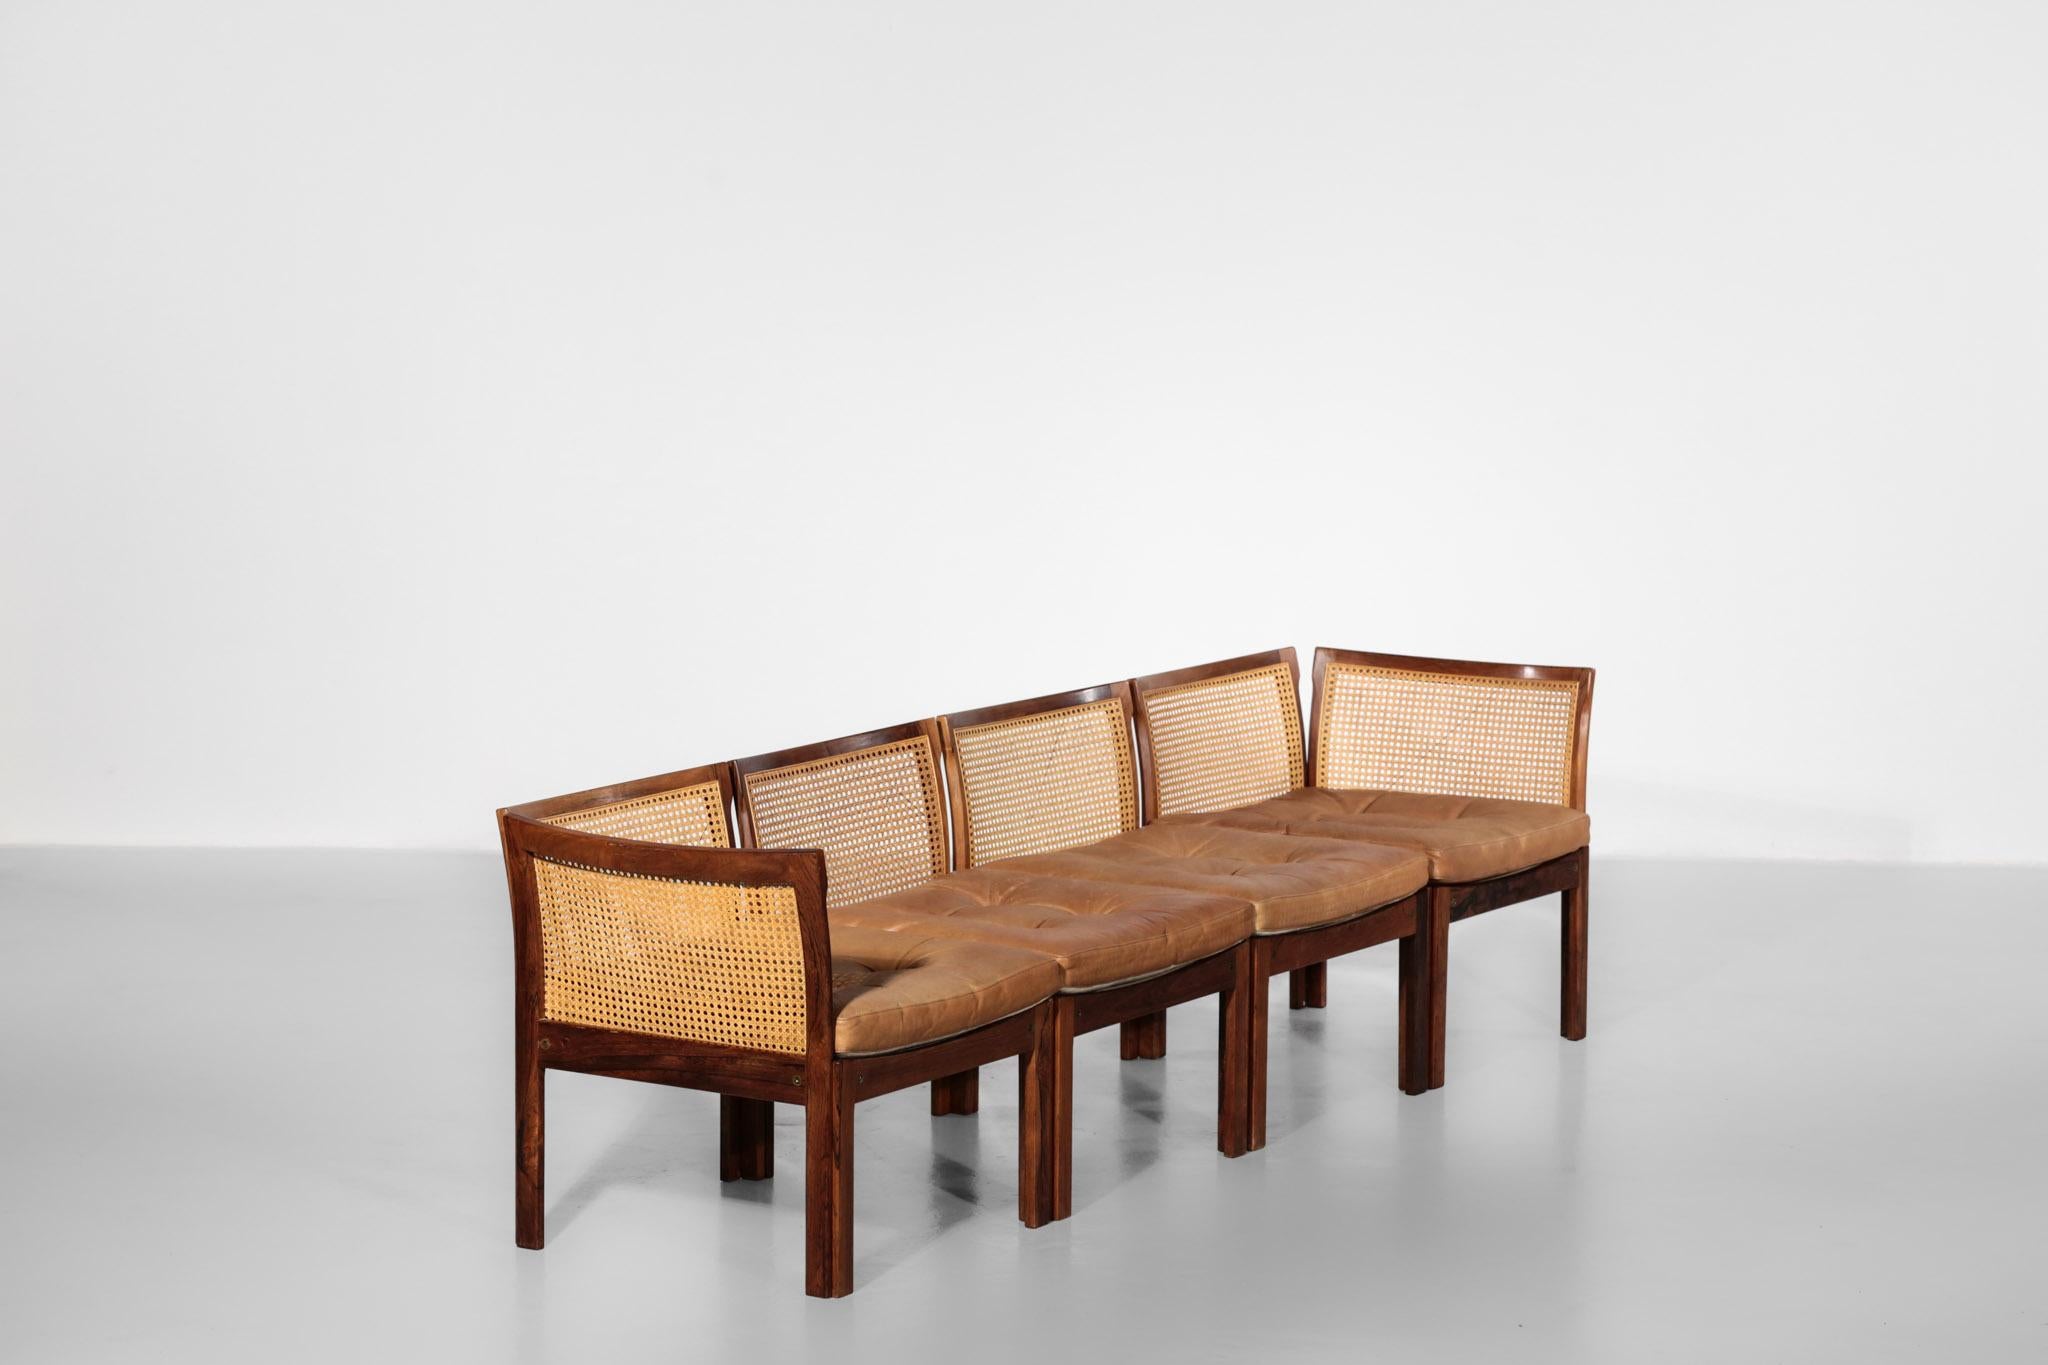 Rare bench by Danish designer Illum Wikkelso

Rosewood and wicker structure, fawn leather cushion with a beautiful patina.
  